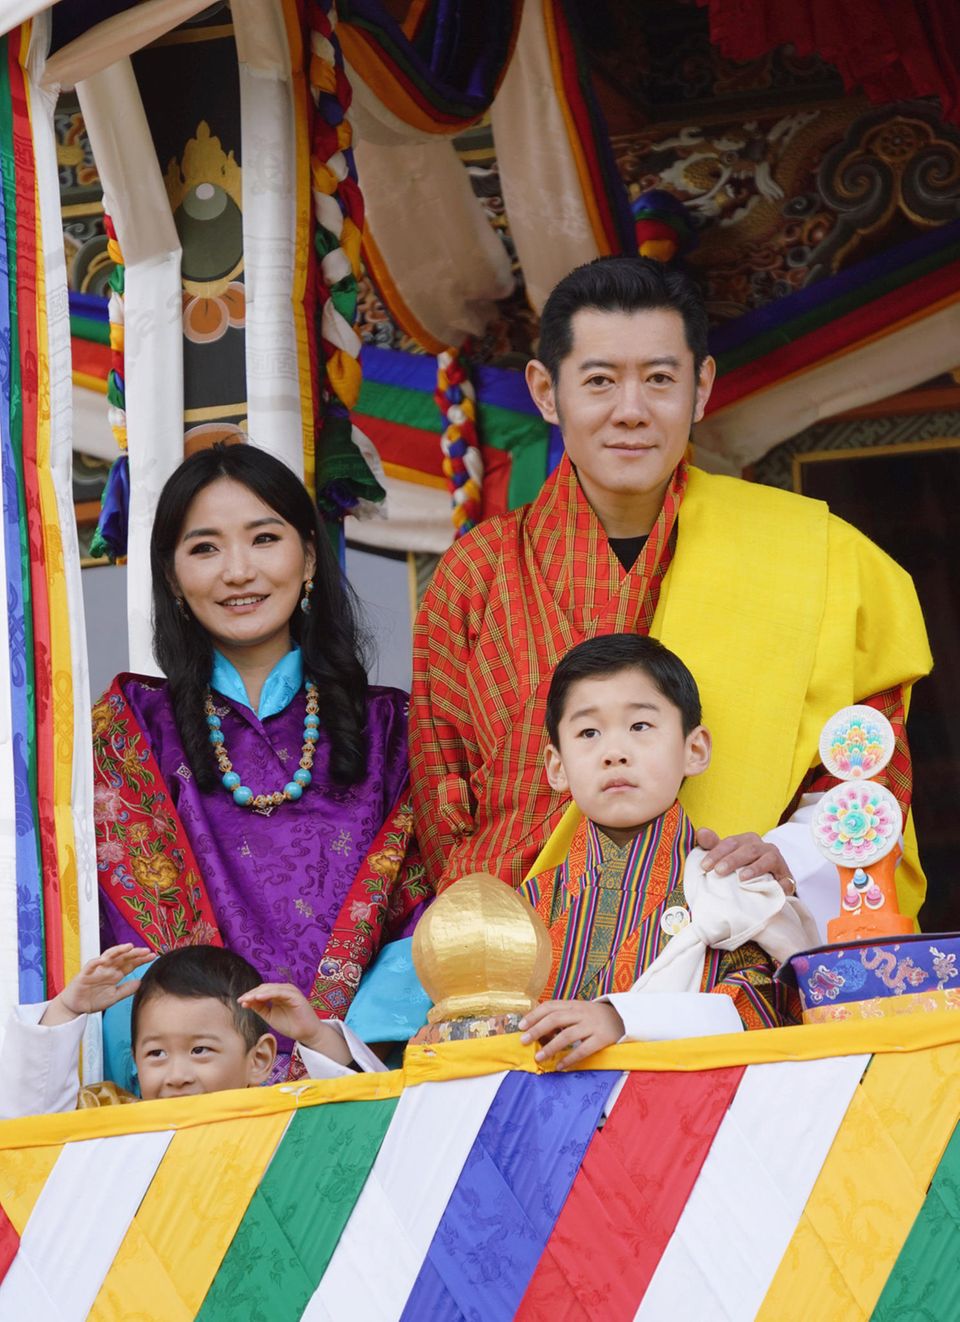 Queen Jetsun and King Jigme of Bhutan with two of their three children Prince Ugyen and heir to the throne Prince Jigme